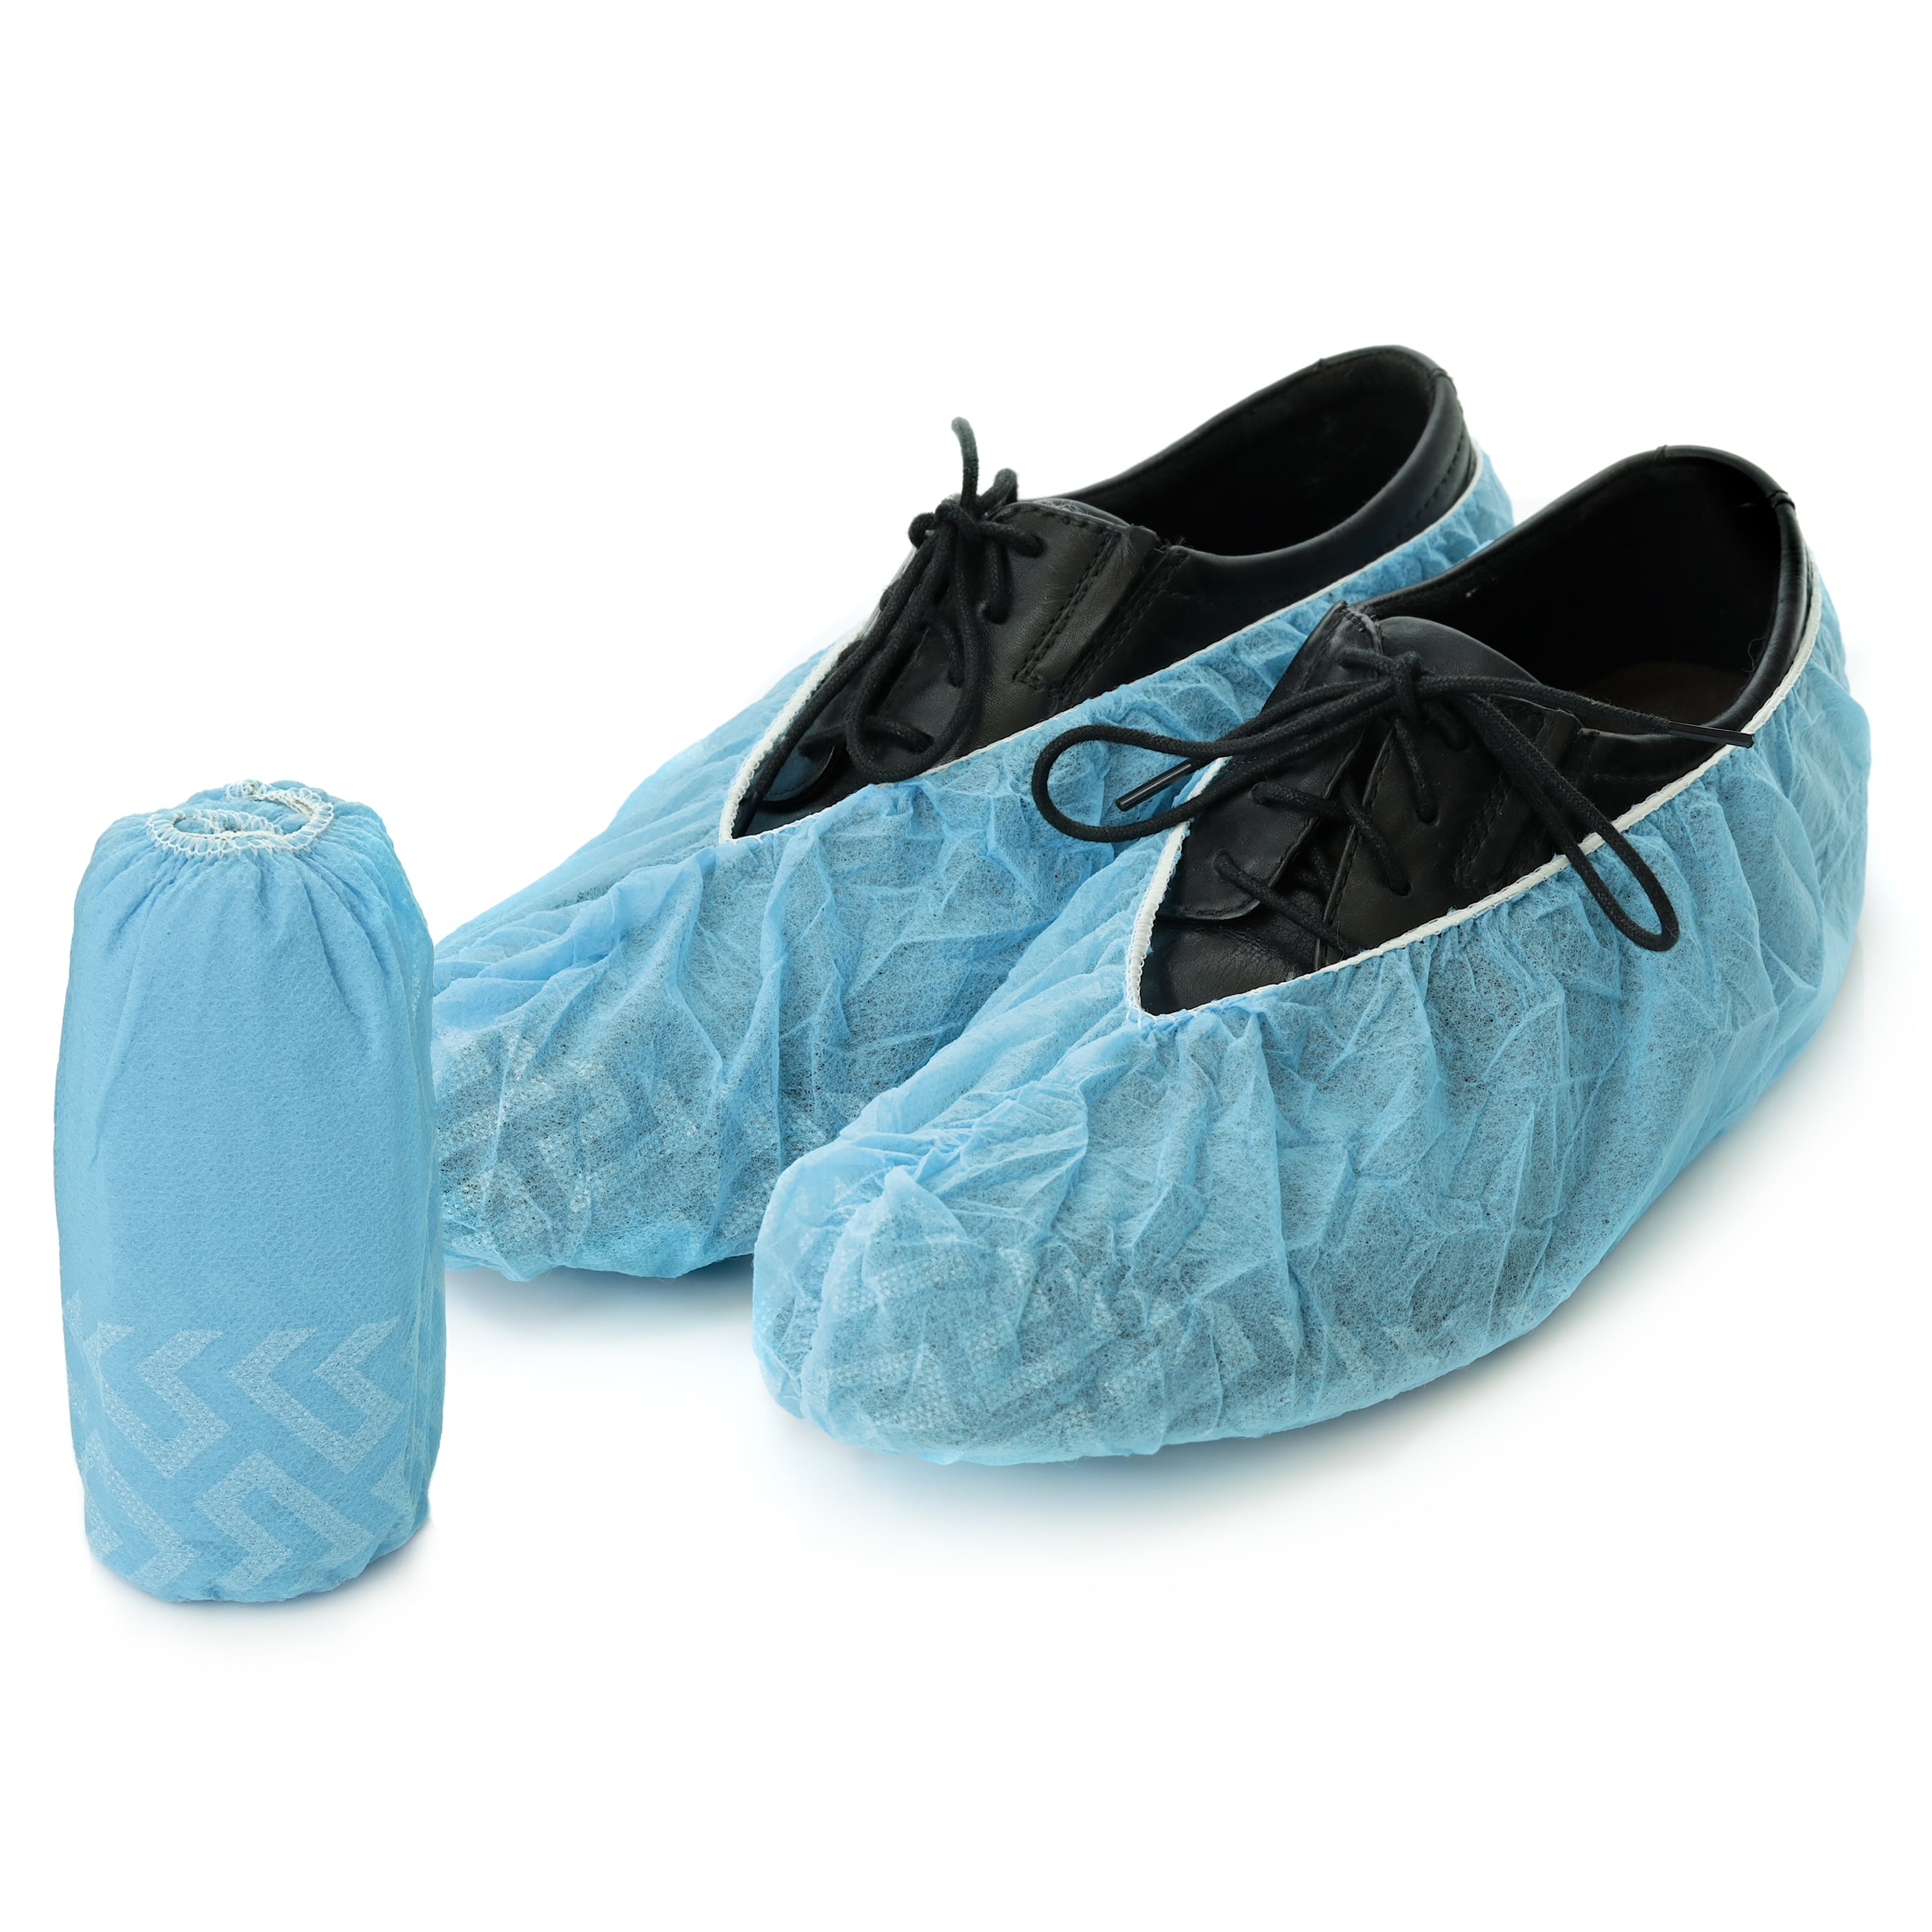 50 Pairs Blue Disposable Shoe Cover 100 PCS Nonslip Protective Waterproof Shoes Boot Covers Thicken Disposable Dust-proof Large One Size Fits Most